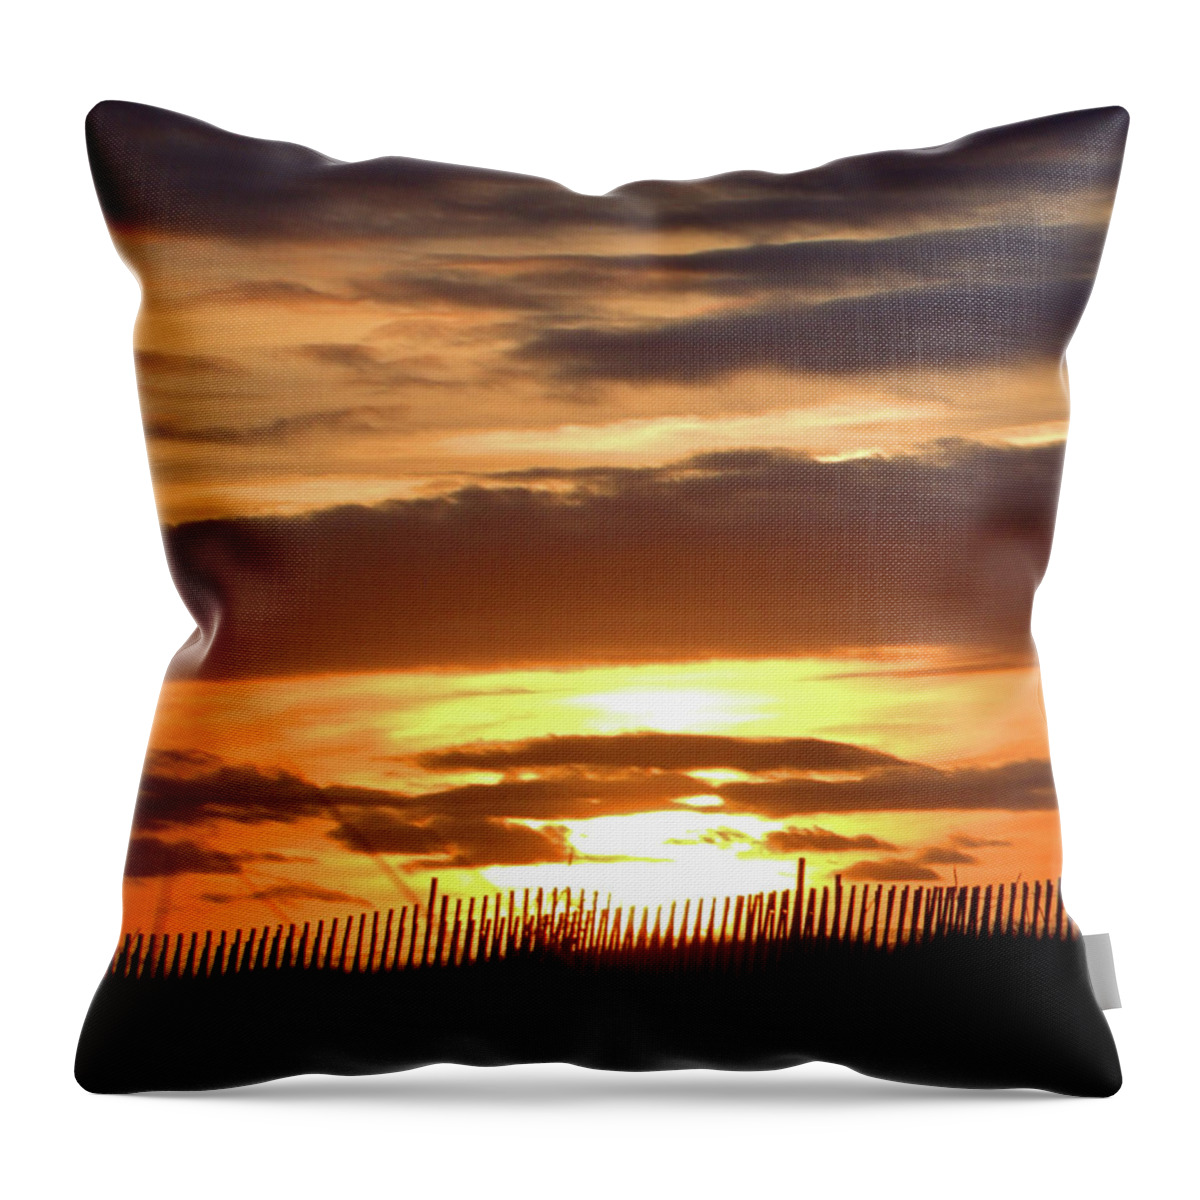 Sun Throw Pillow featuring the photograph Sunset Dunes I I by Newwwman